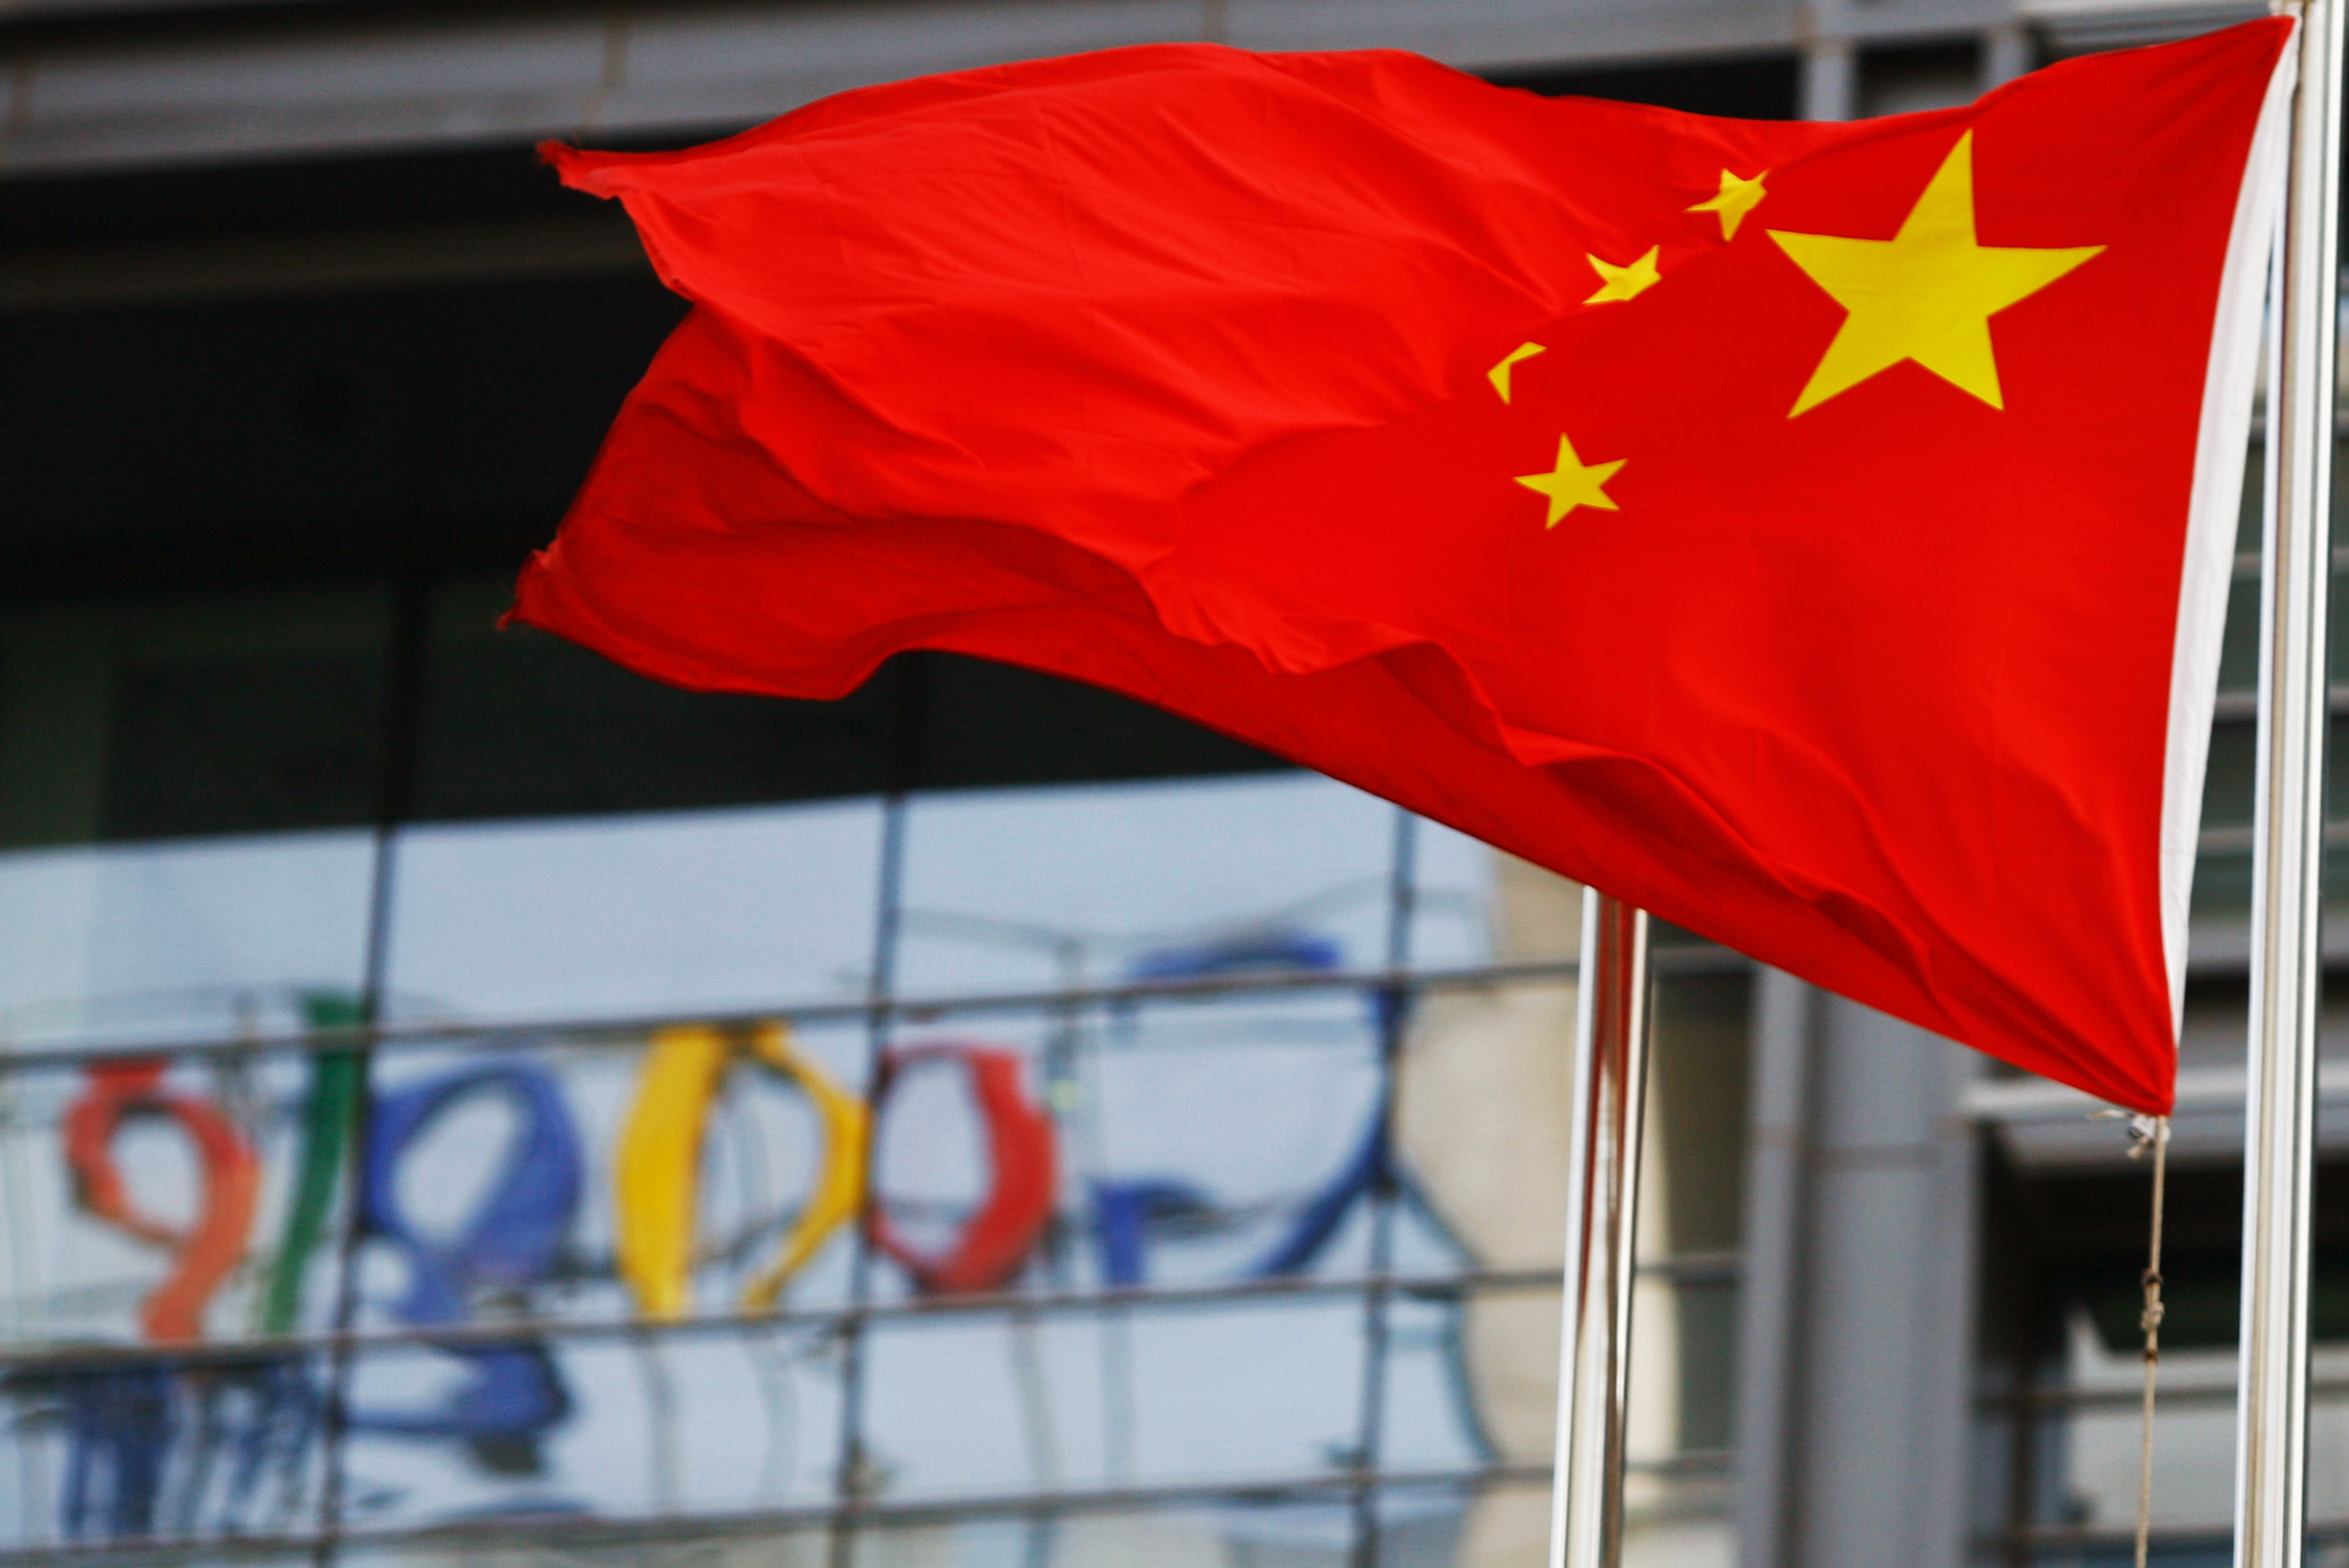 The Google logo is reflected in windows of the company's China head office as the Chinese national flag flies in the wind in Beijing on March 23, 2010. (AFP/Getty Images)